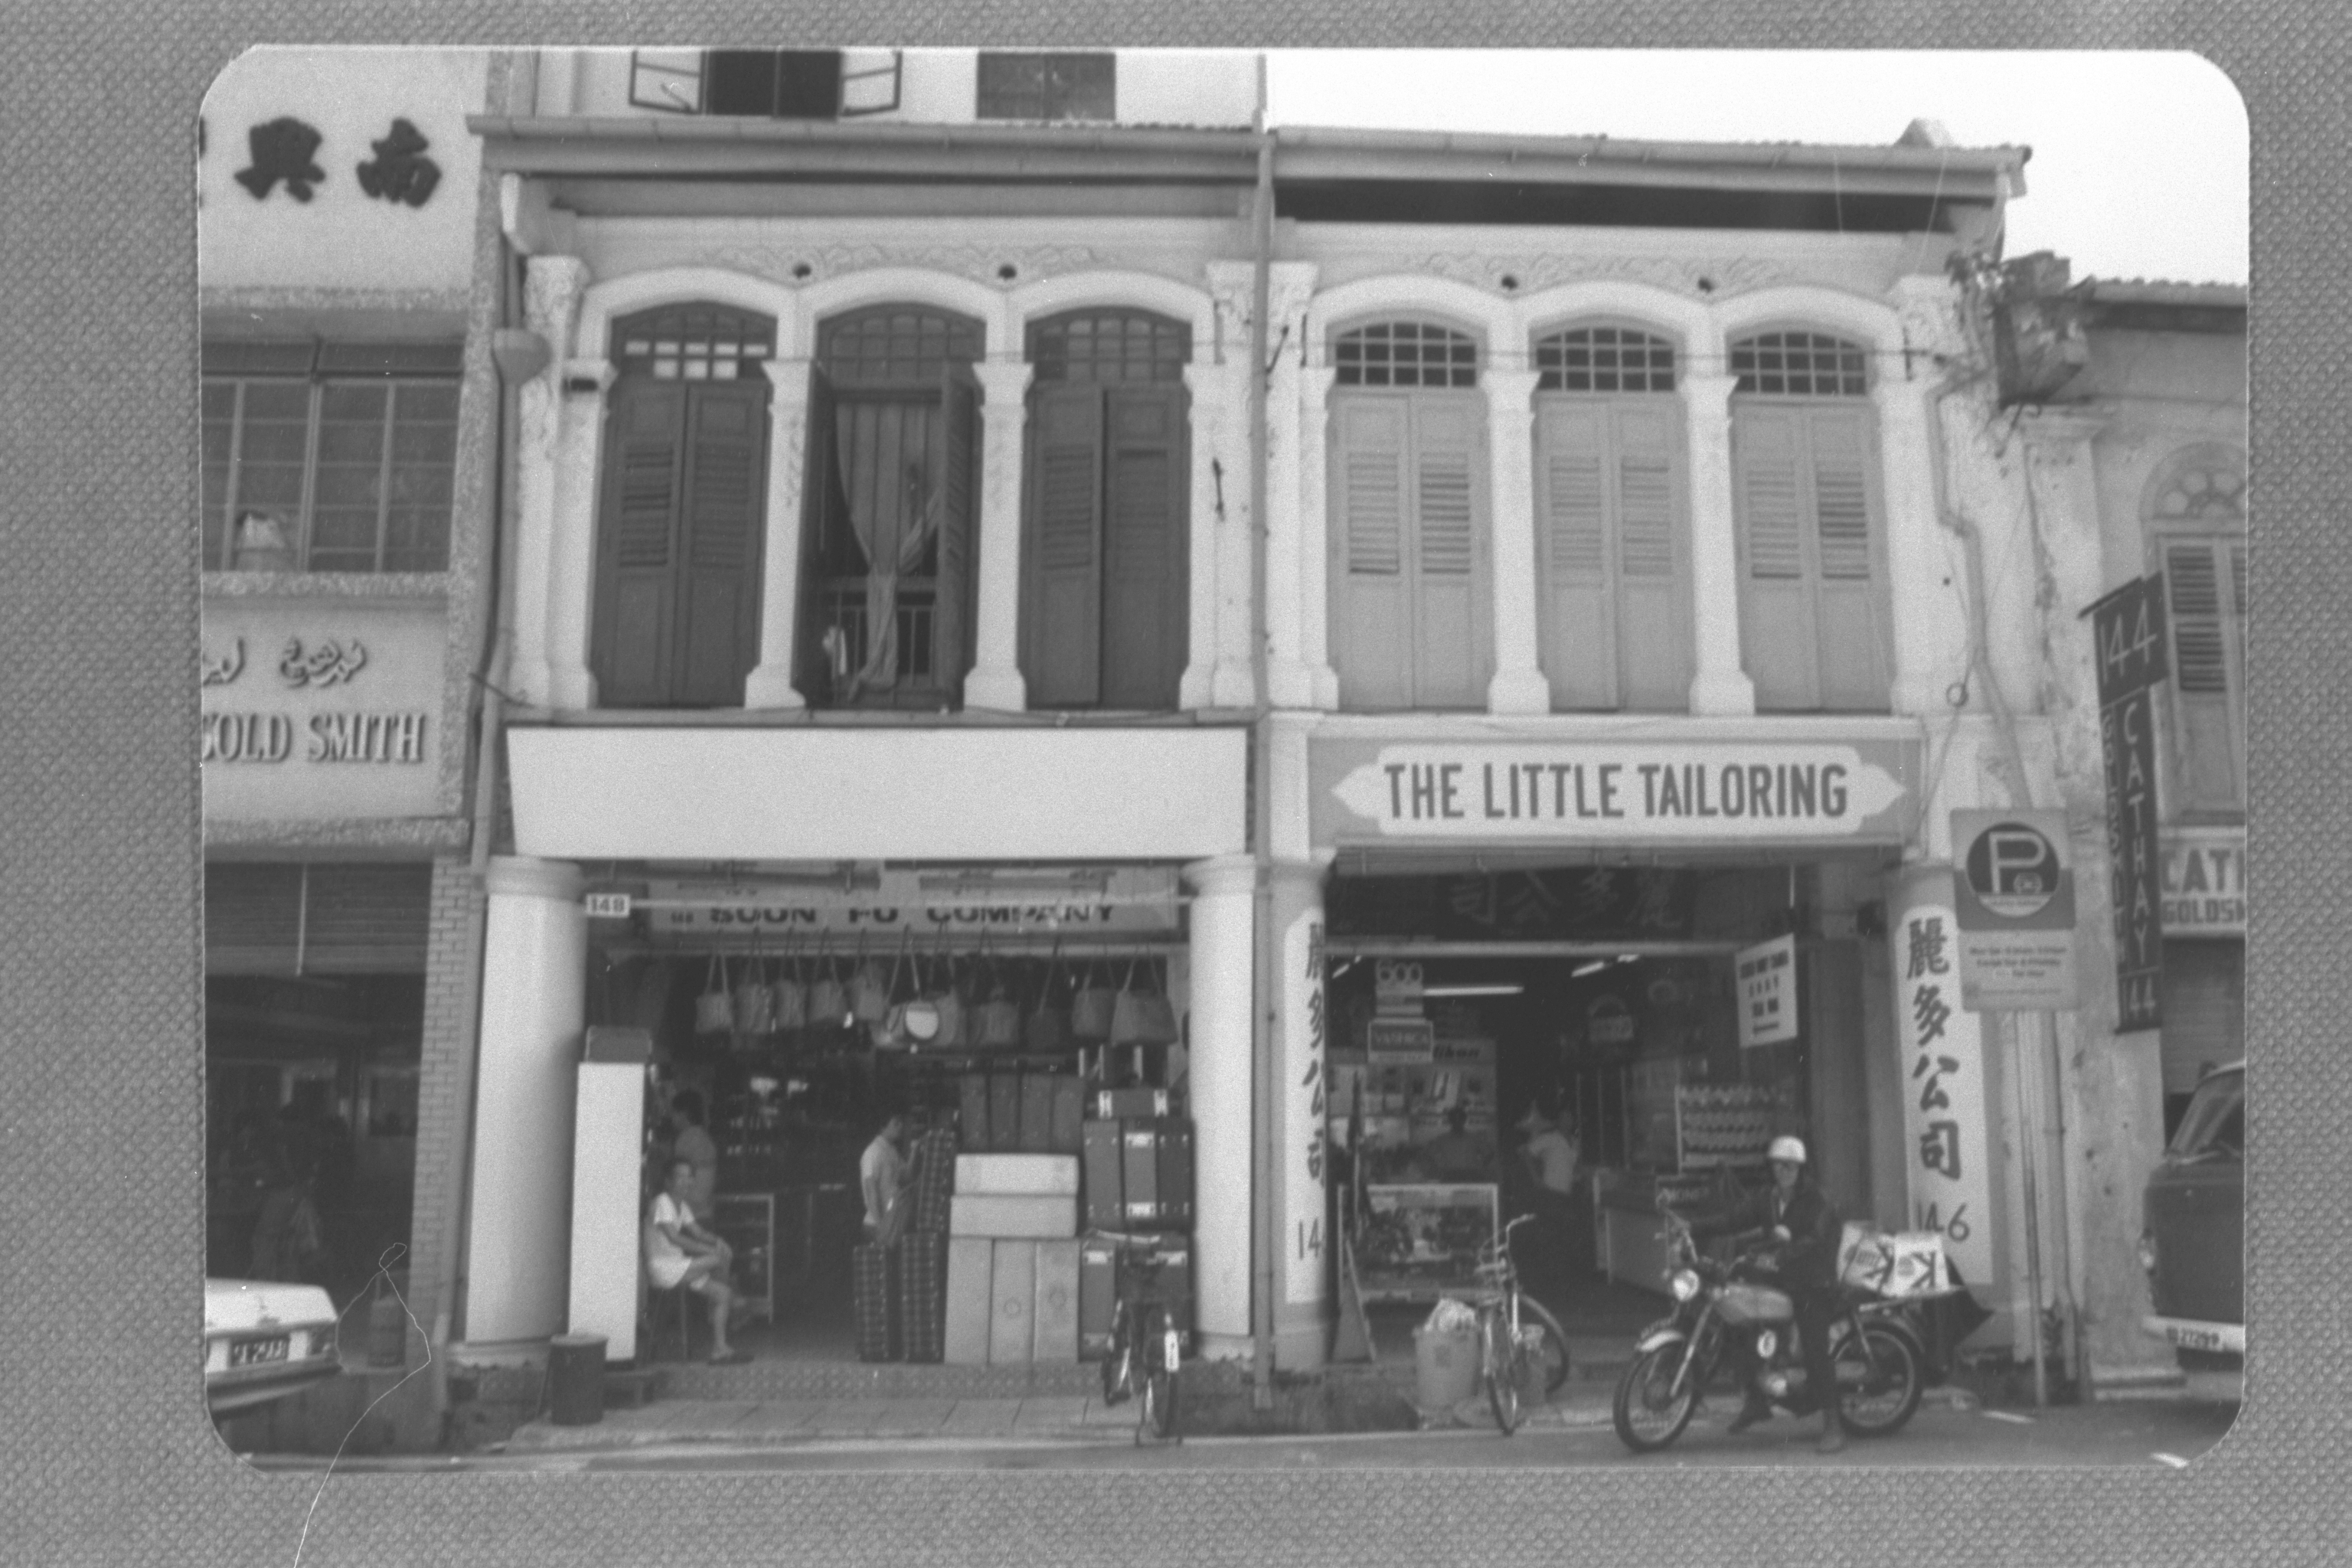 Tailoring shop on Arab Street, 1985. URA Collection, courtesy of National Archives of Singapore